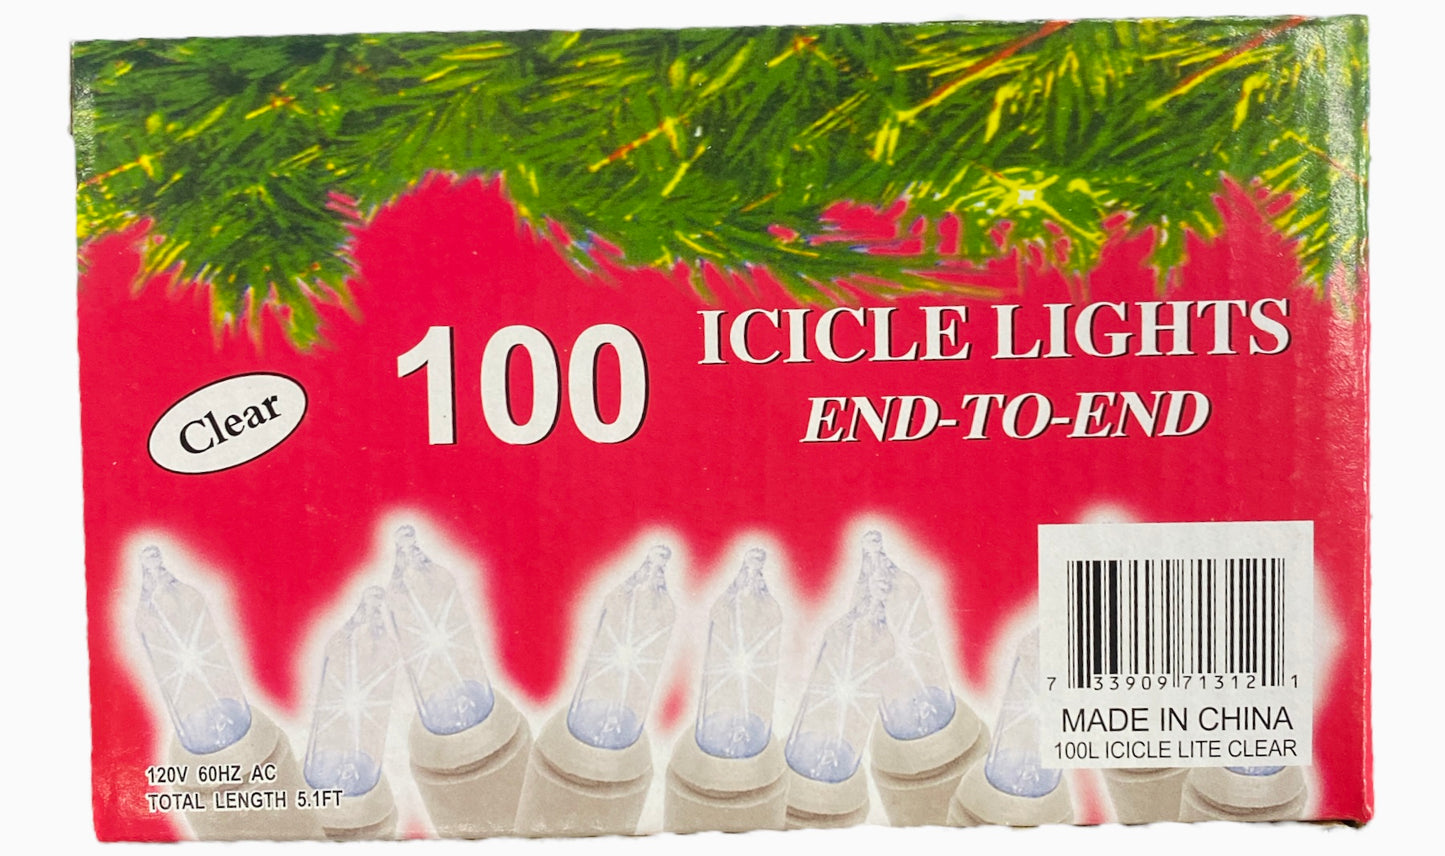 CLEAR 100 ICICLE LIGHTS End to End Light Set